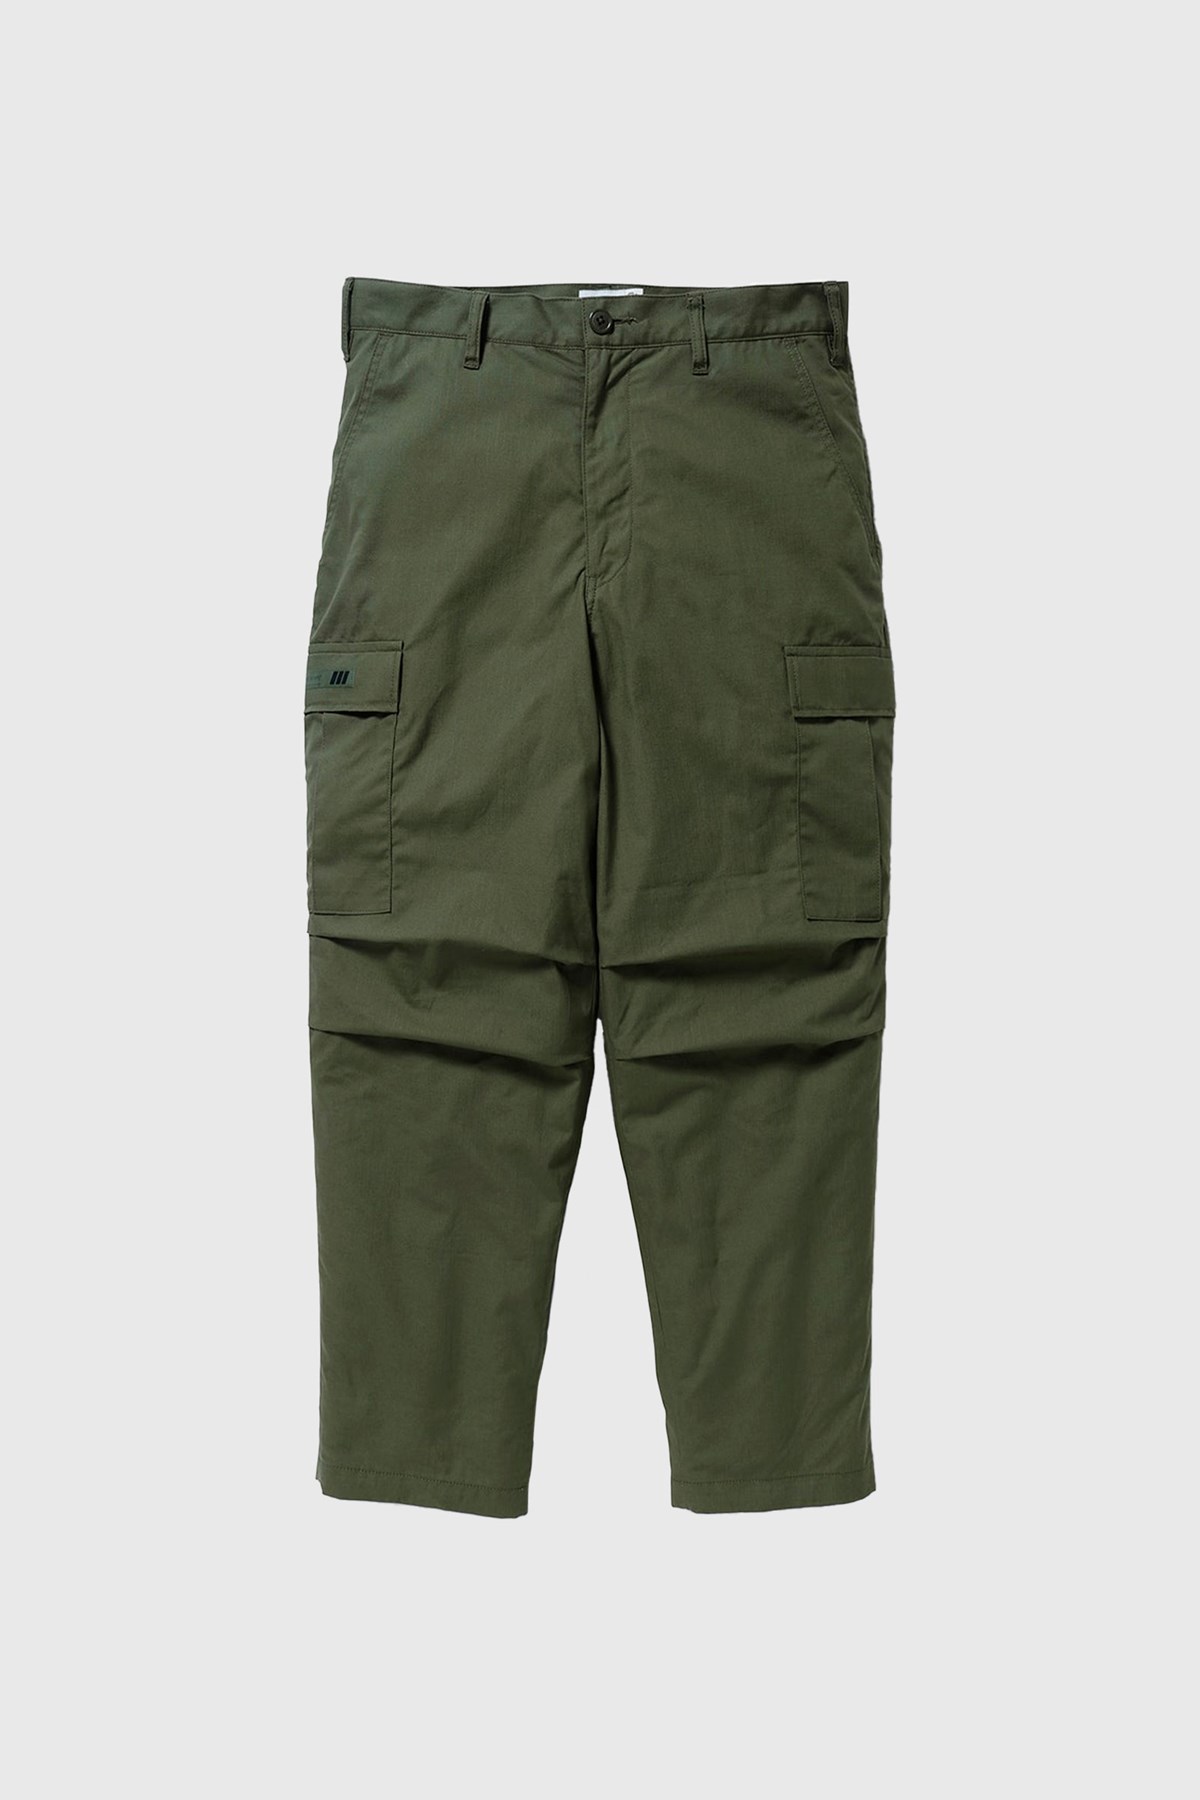 WTAPS JUNGLE STOCK TROUSERS OLIVE S